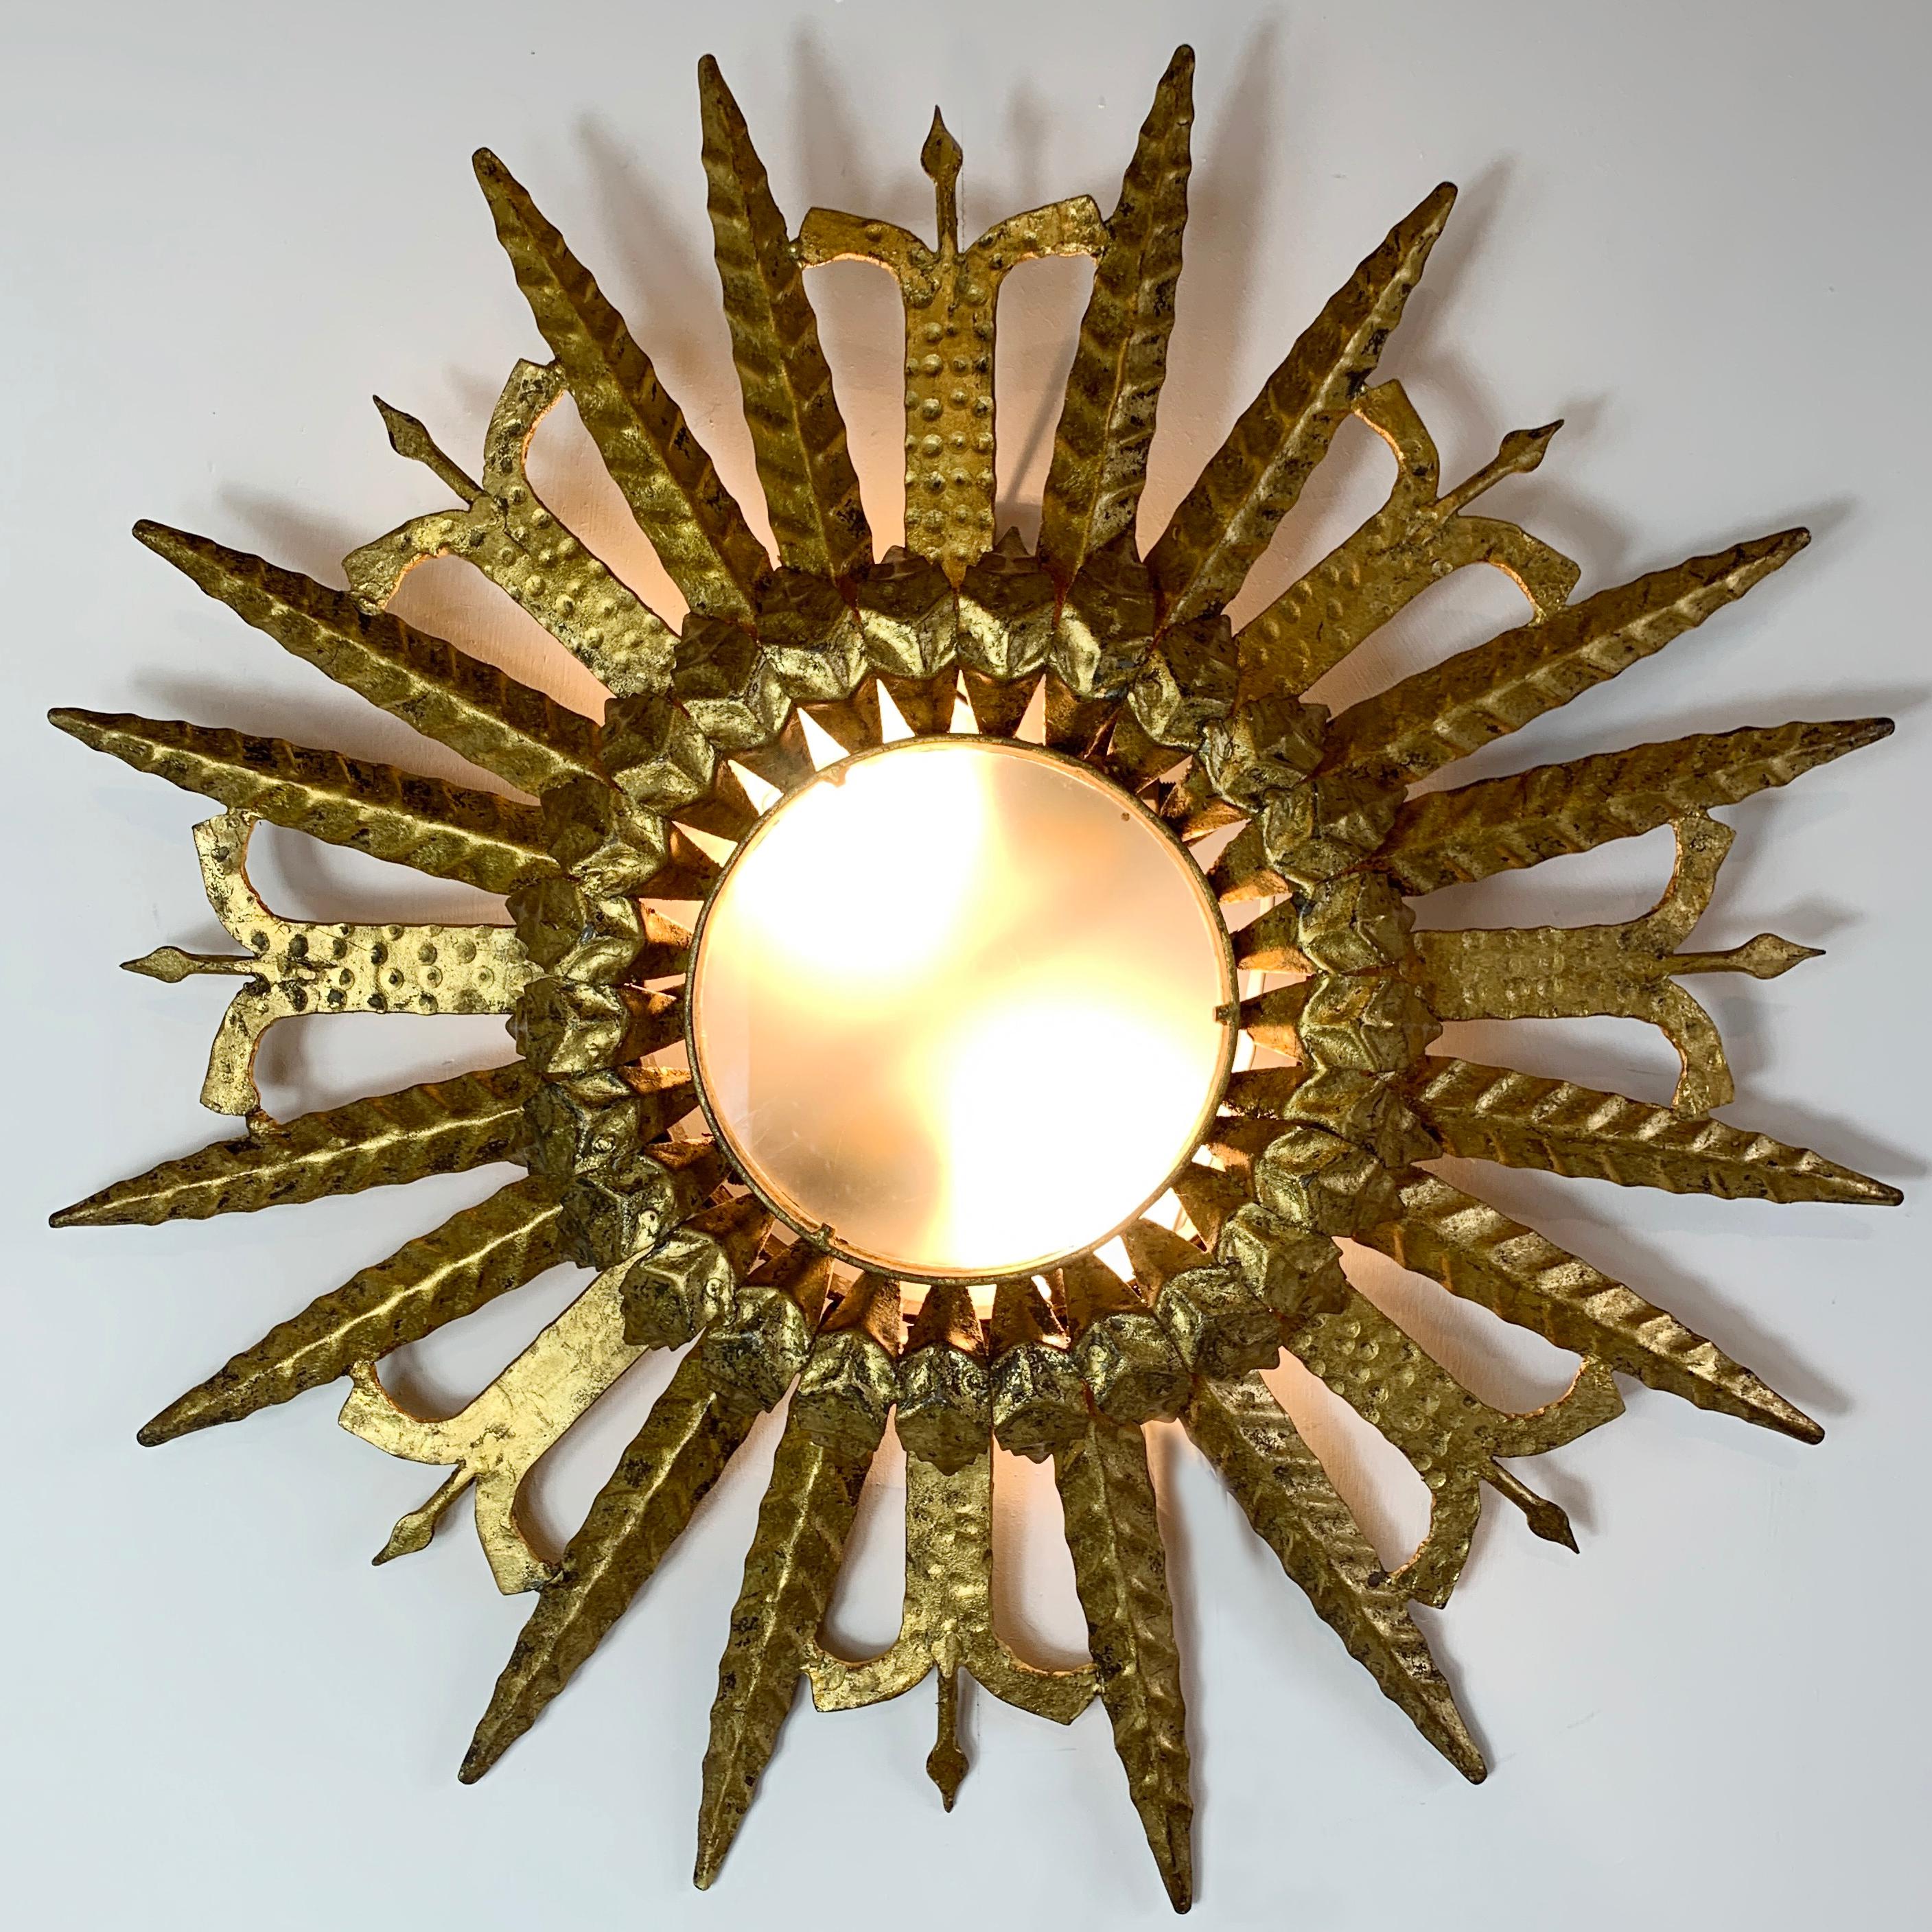 1950s’ Spanish gilt iron sunburst ceiling light

An incredible gilt over iron Spanish sunburst, featuring two lampholders sitting behind the opaque glass 

This is a truly wonderful, and exceptionally well made example of a vintage sunburst